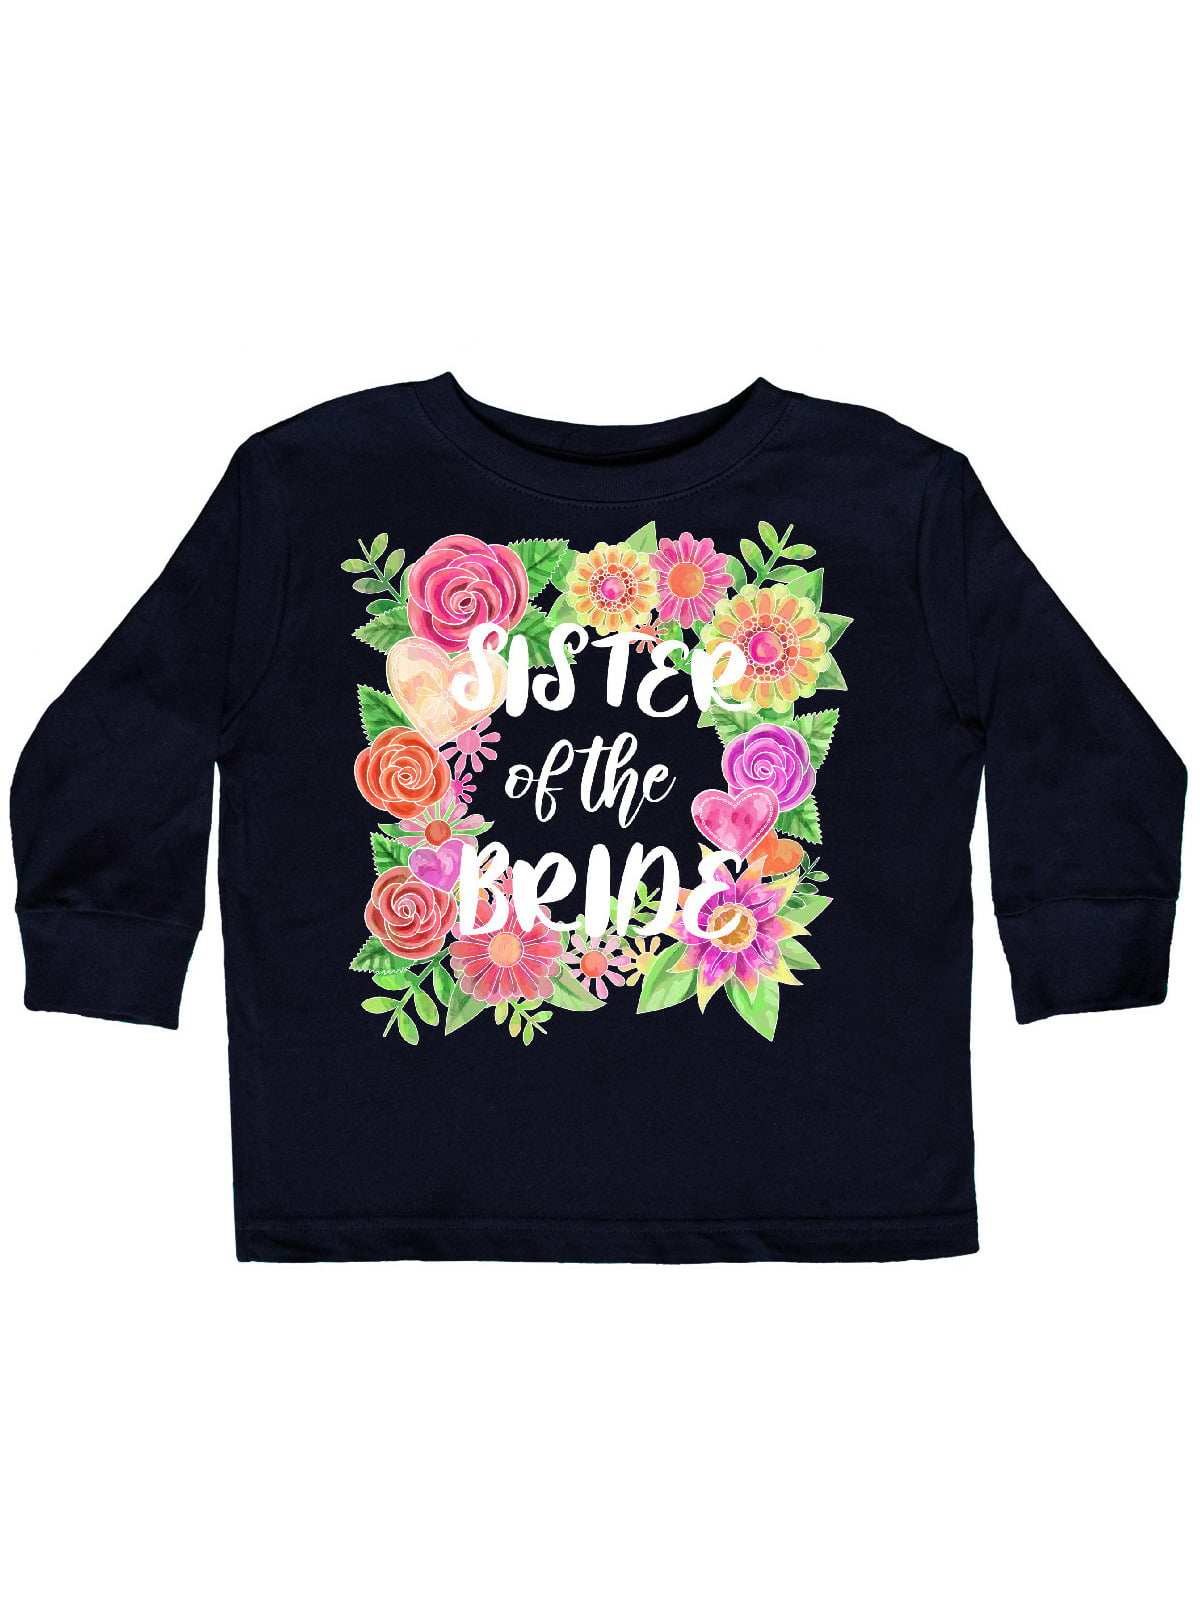 inktastic Sister of The Bride with Bouquet Toddler T-Shirt